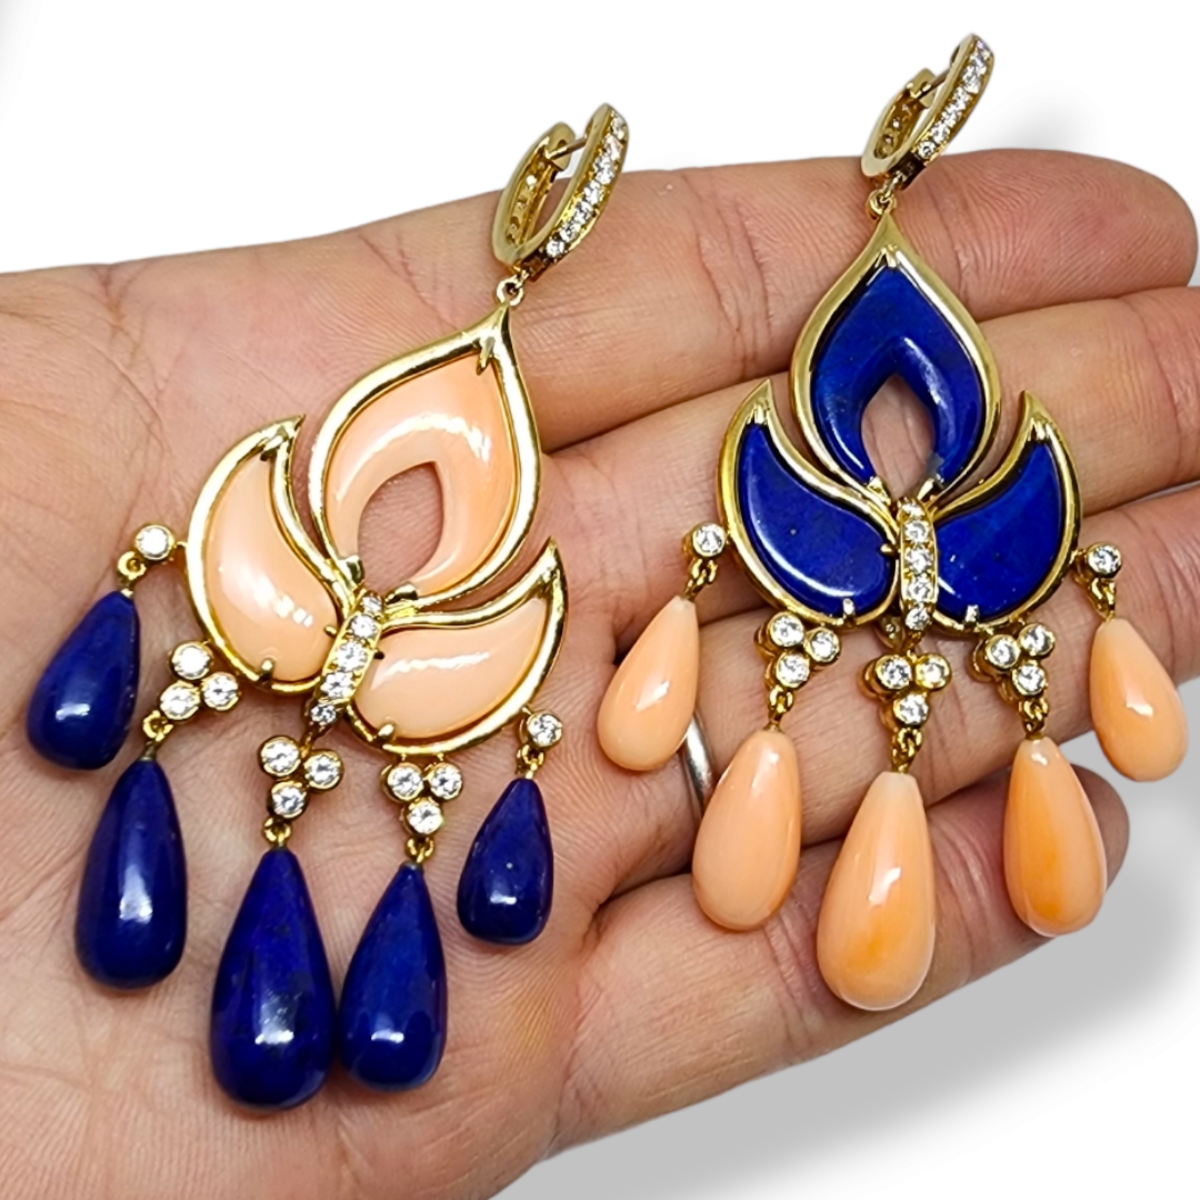 1970s 18KT Yellow Gold Diamond, Coral & Lapis Lazuli Floral Earrings in hand